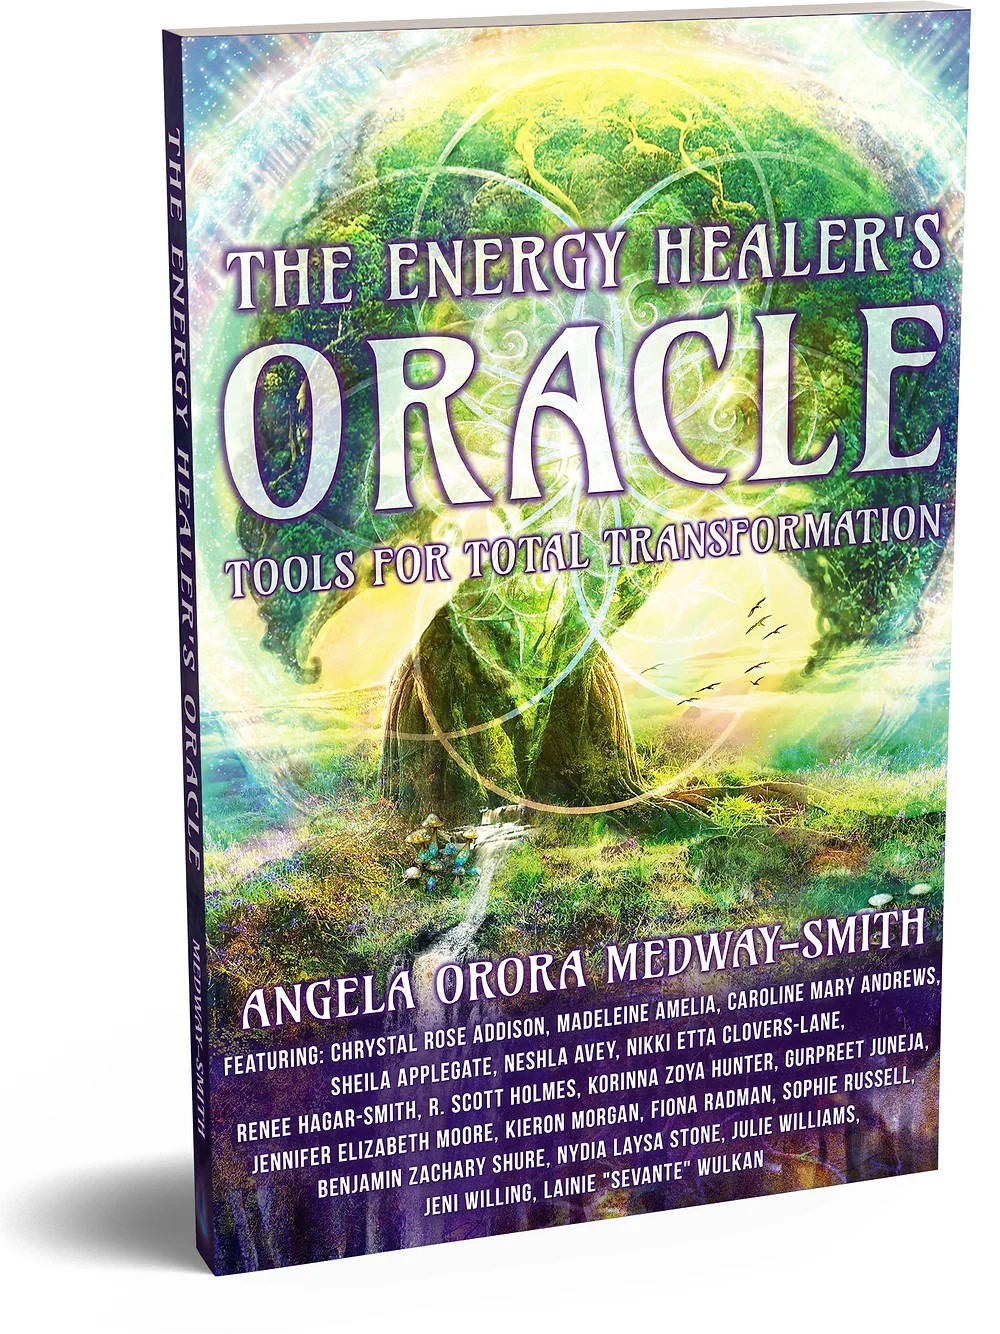 New book out. Order now! The Energy Healer's Oracle